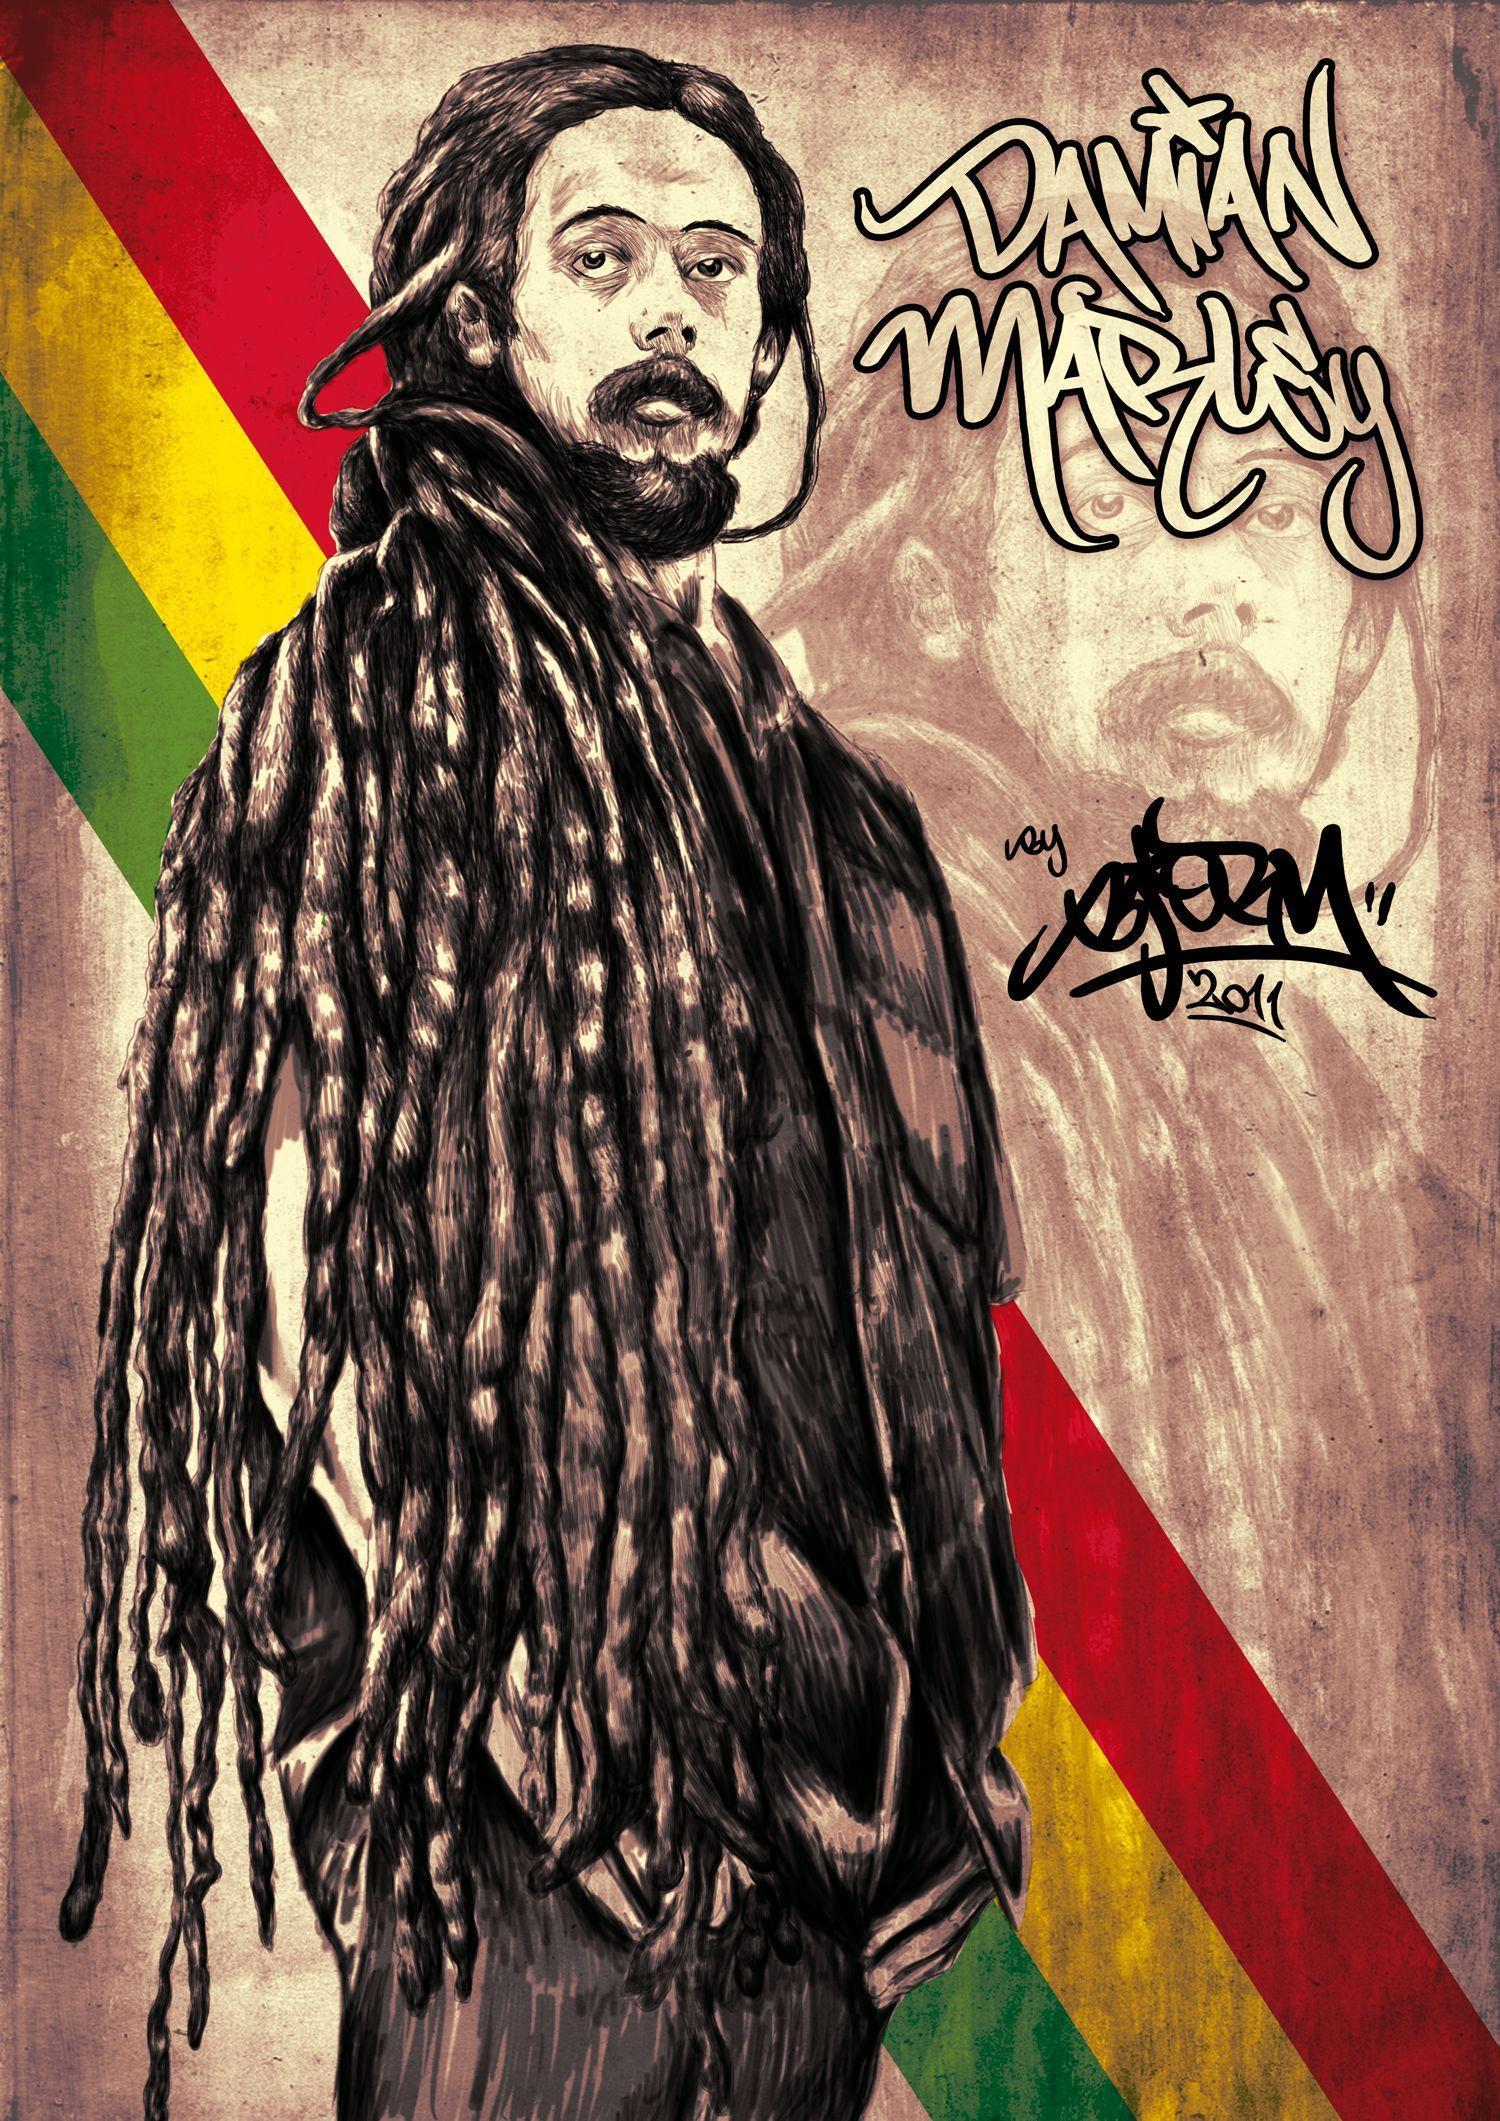 Damian Marley - beautiful APK pour Android Télécharger